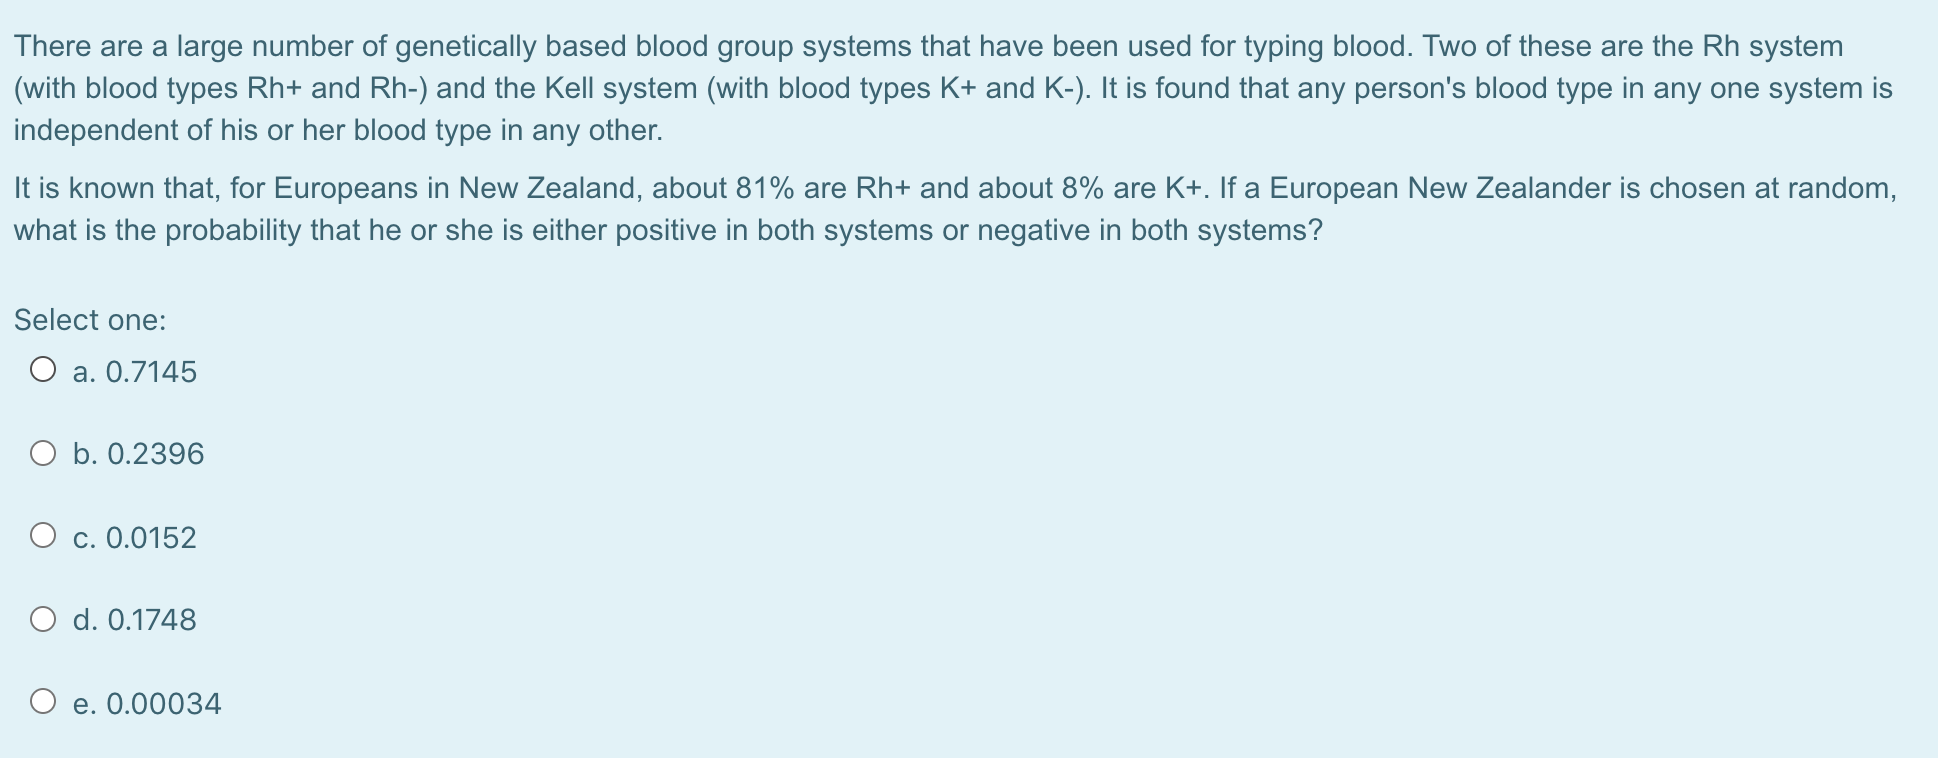 There are a large number of genetically based blood group systems that have been used for typing blood. Two of these are the Rh system
(with blood types Rh+ and Rh-) and the Kell system (with blood types K+ and K-). It is found that any person's blood type in any one system i
ndependent of his or her blood type in any other.
It is known that, for Europeans in New Zealand, about 81% are Rh+ and about 8% are K+. If a European New Zealander is chosen at random
what is the probability that he or she is either positive in both systems or negative in both systems?
Select one:
O a 07145.
